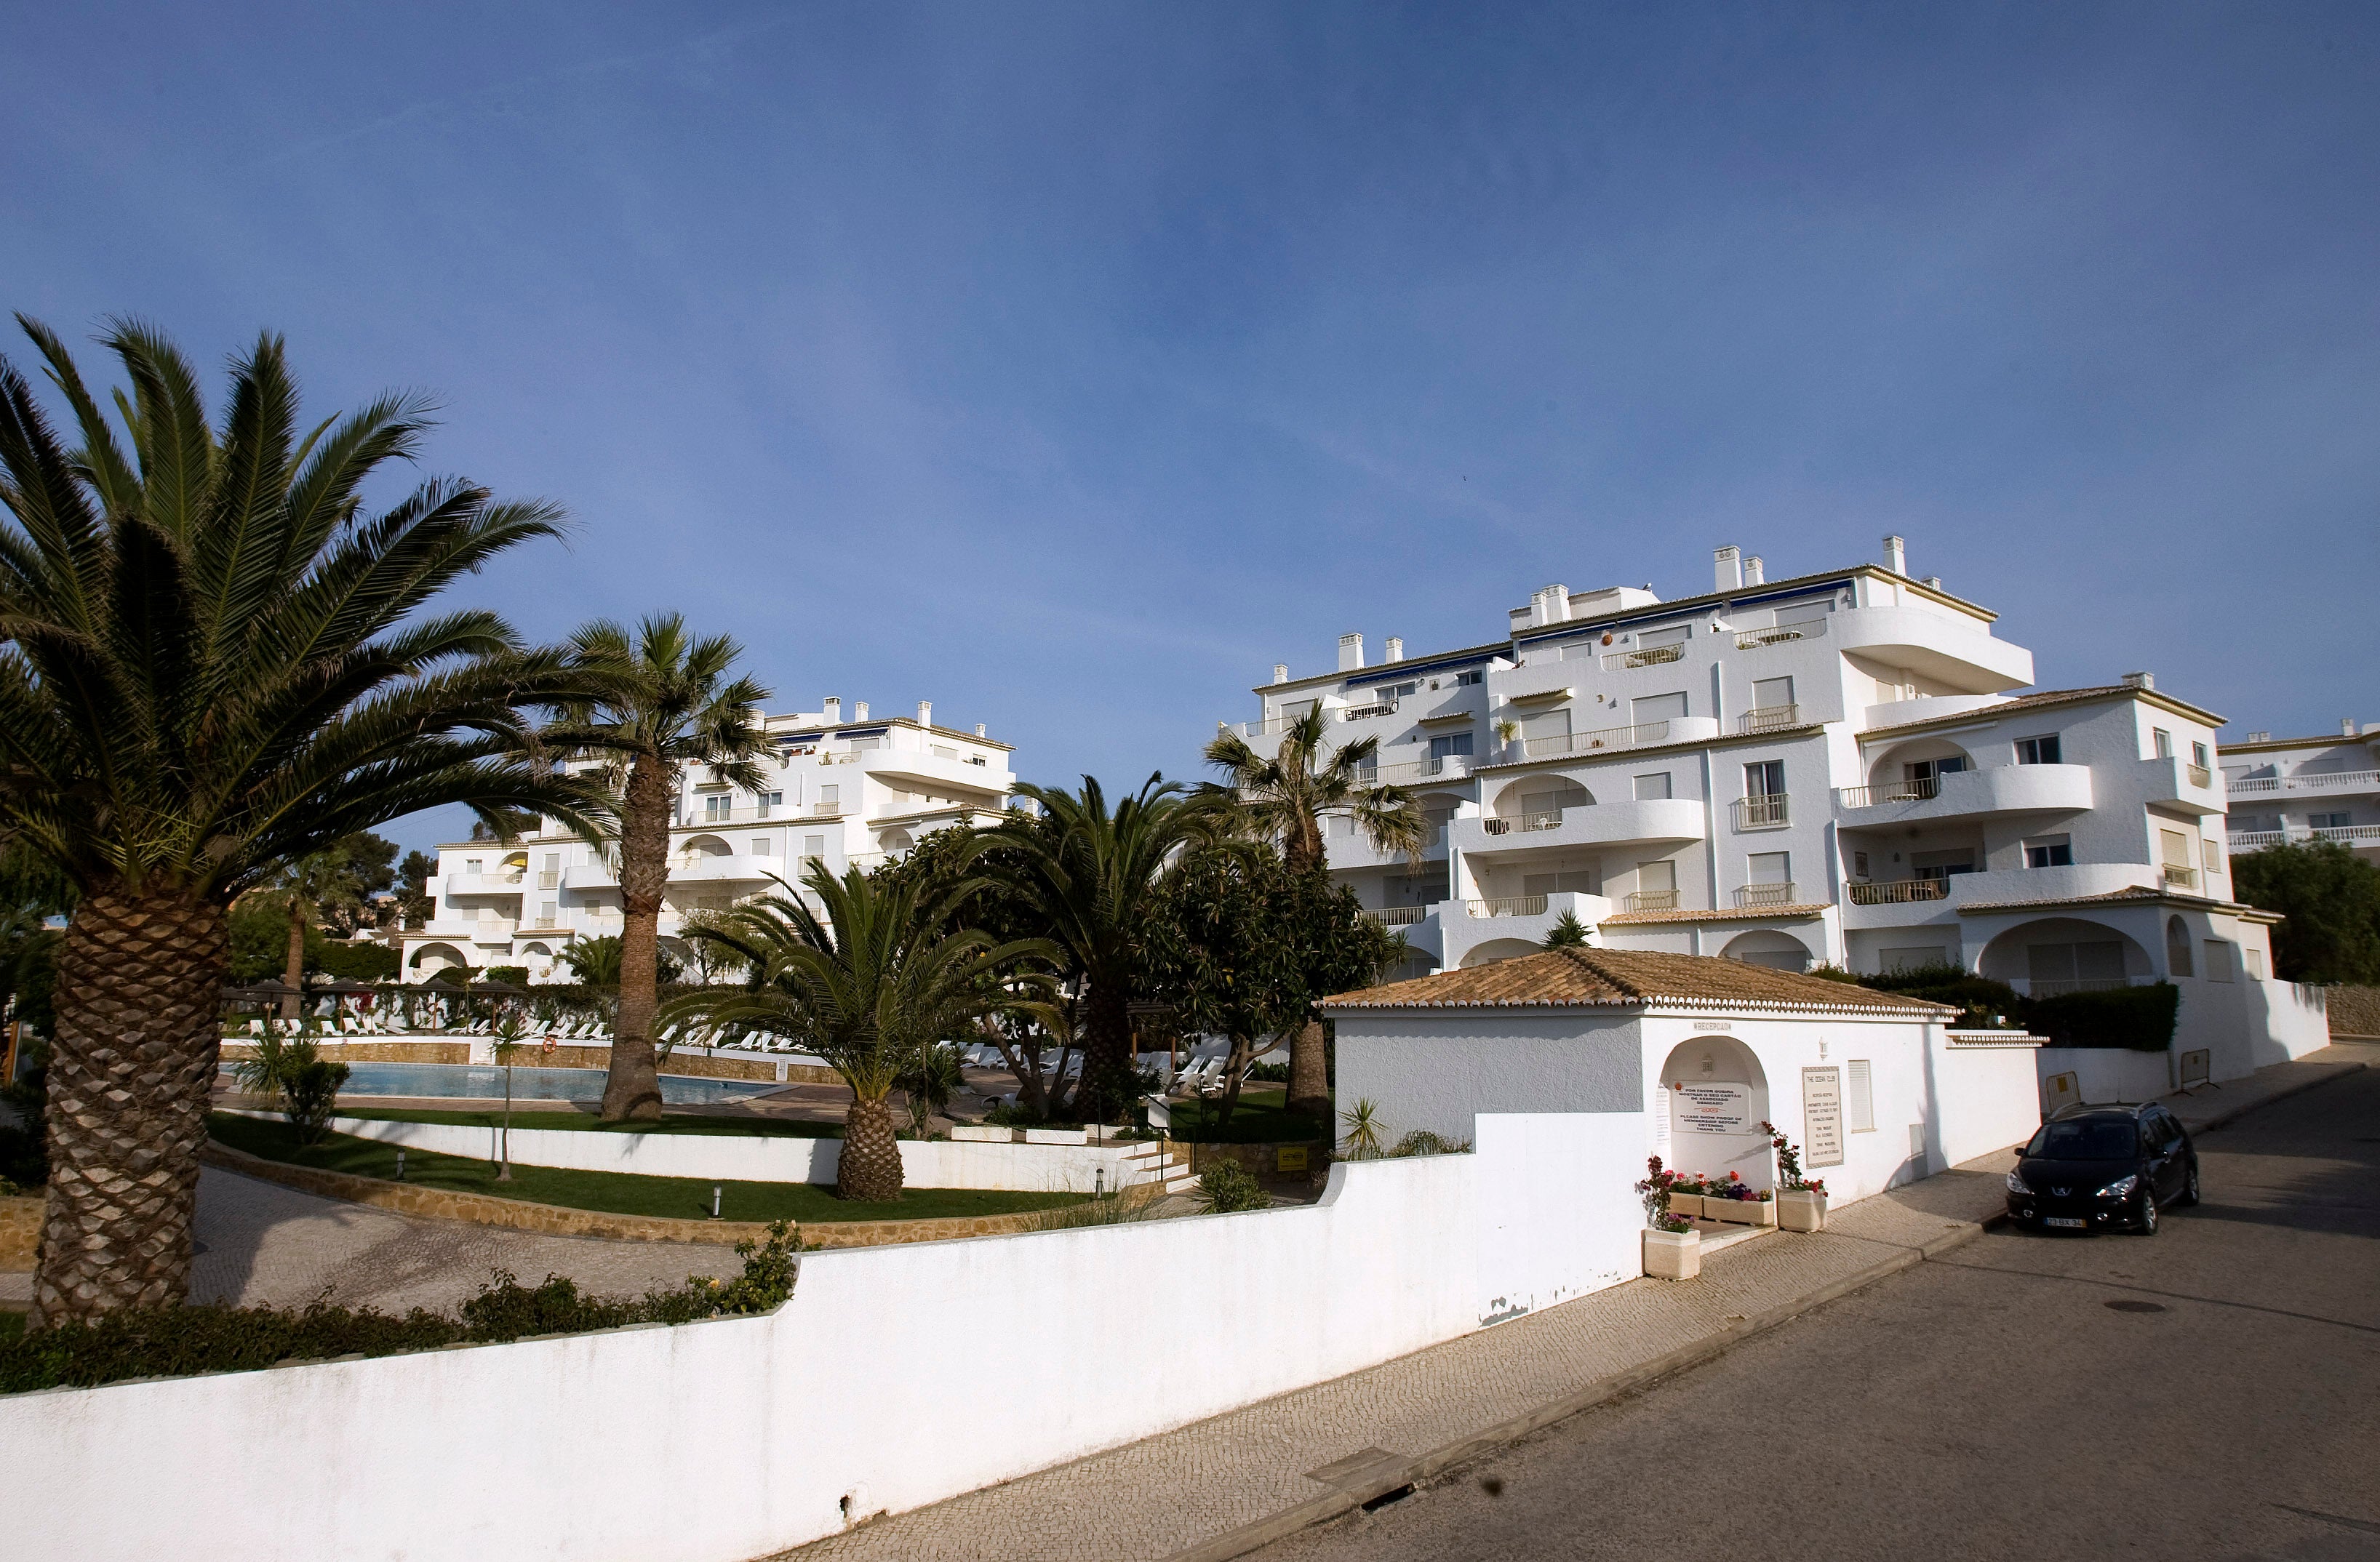 The view of the holiday hotel in Praia da Luz, from which Madeleine disappeared